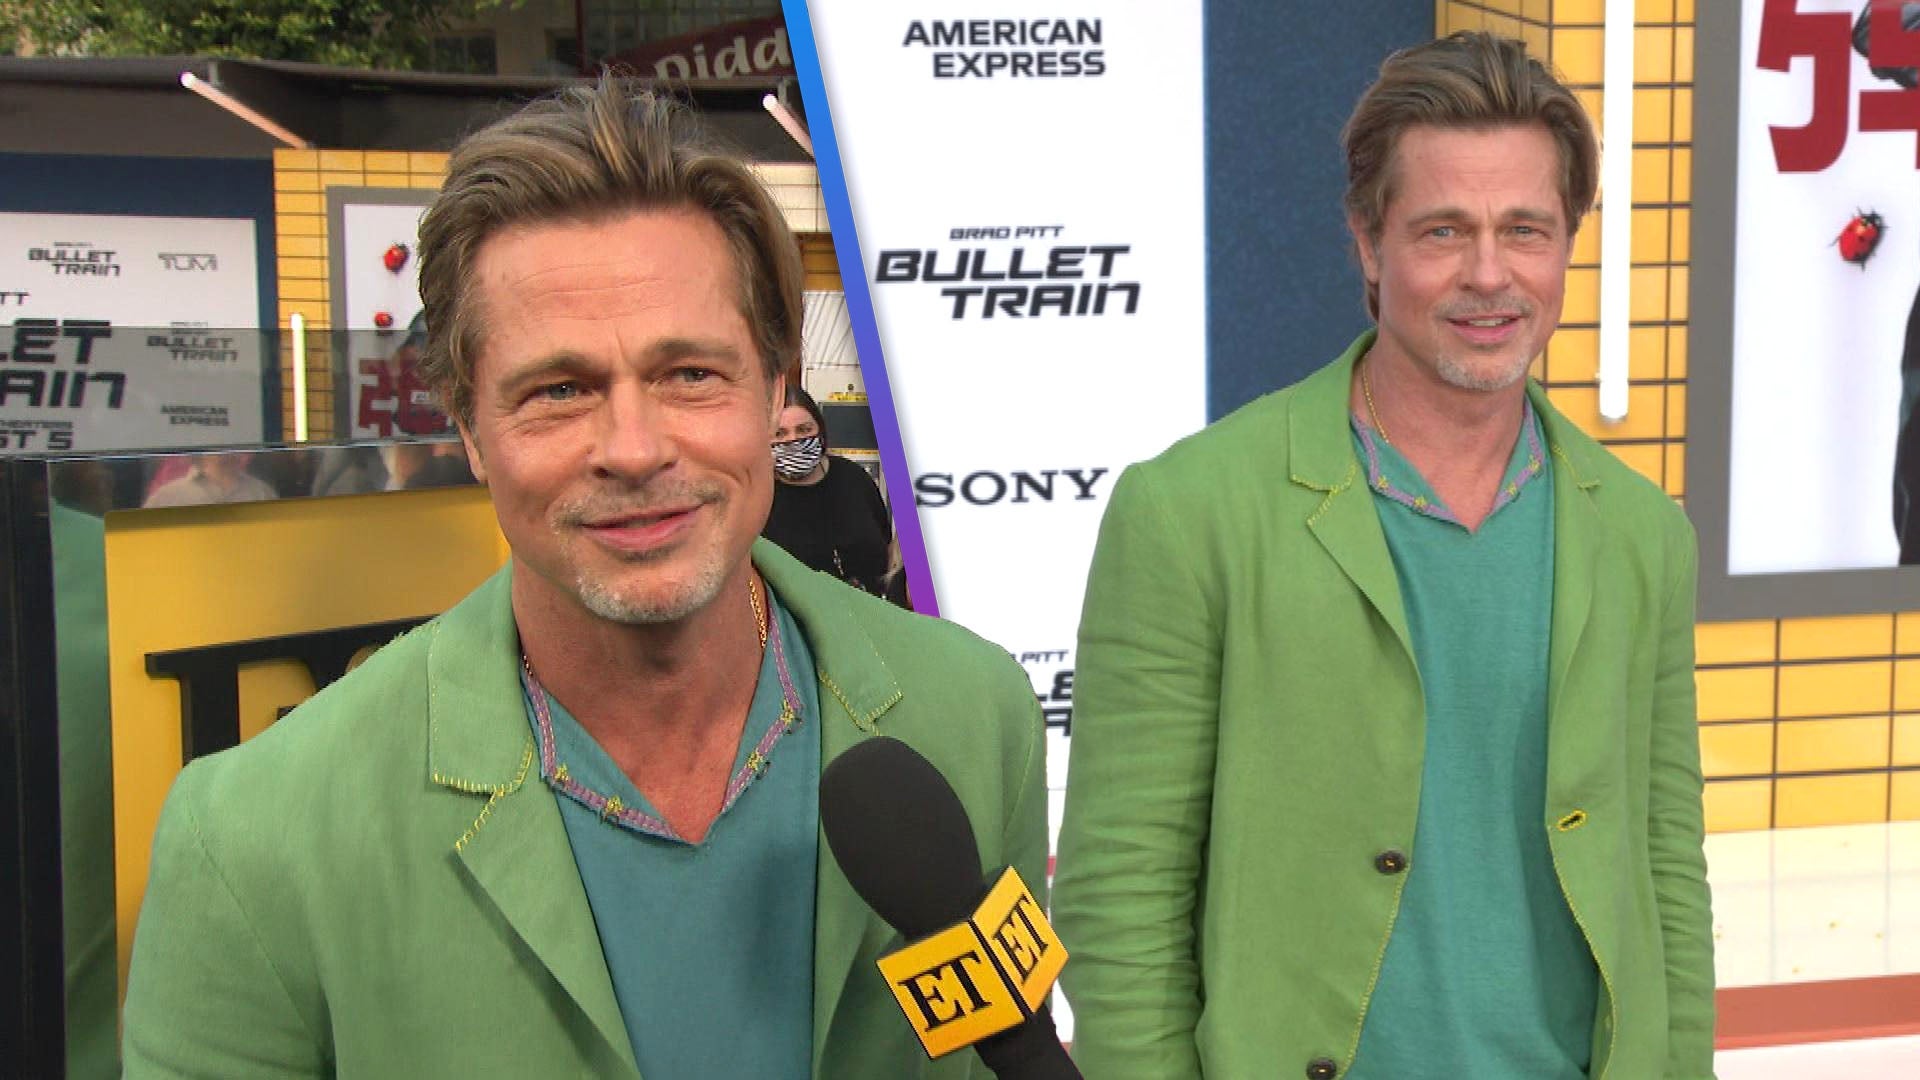 Brad Pitt Explains Why He Switched Up Red Carpet Fashions for Funkier Looks (Exclusive)